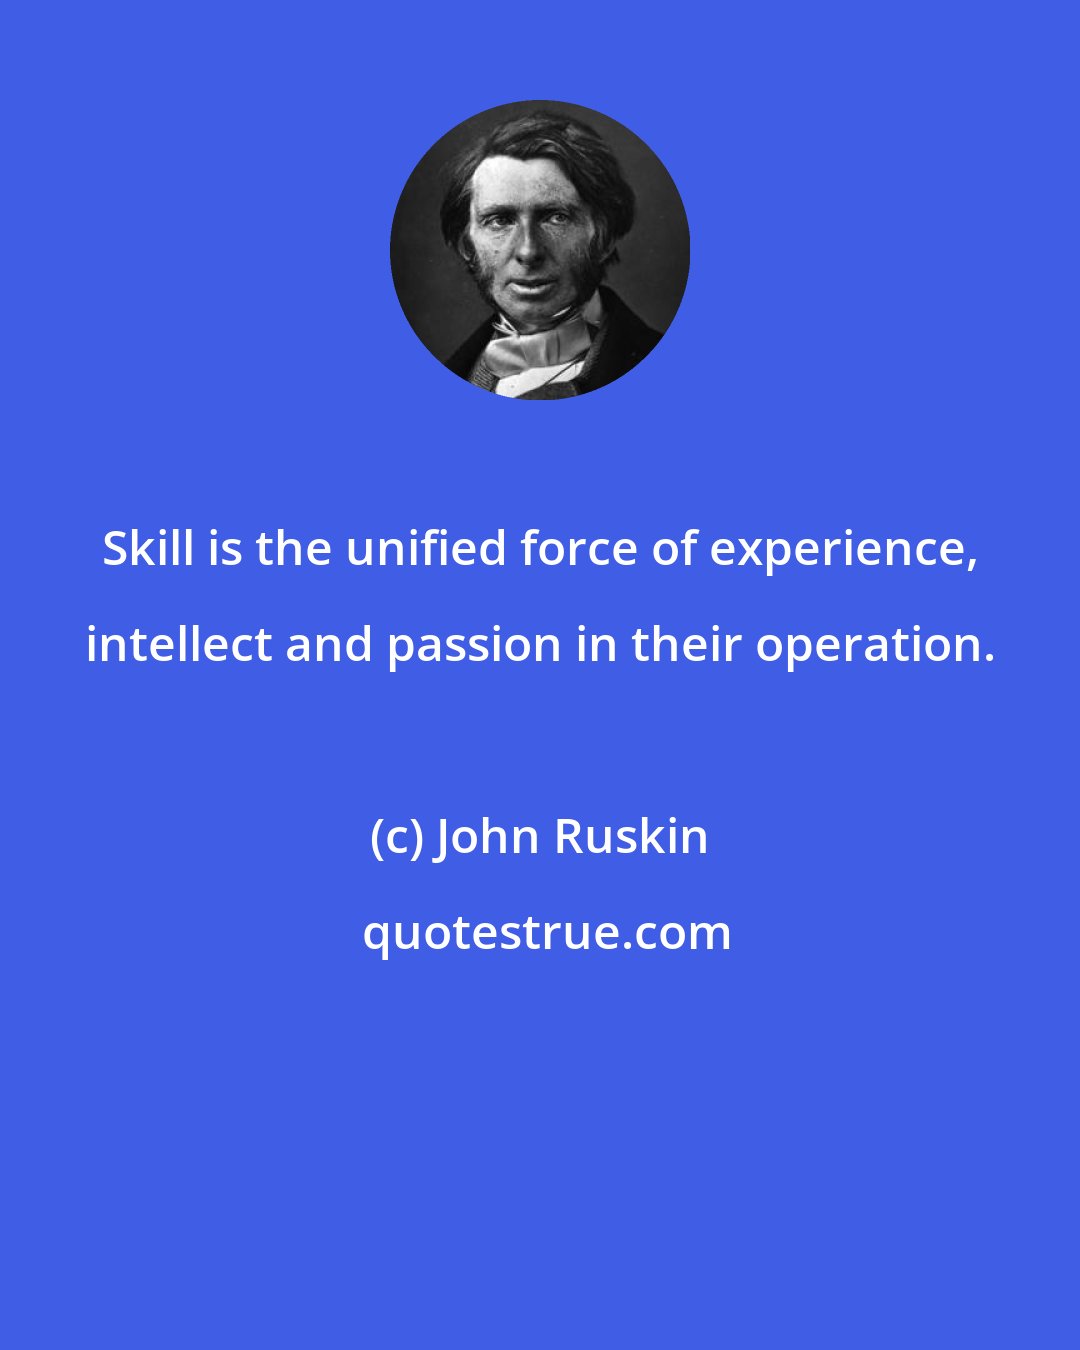 John Ruskin: Skill is the unified force of experience, intellect and passion in their operation.